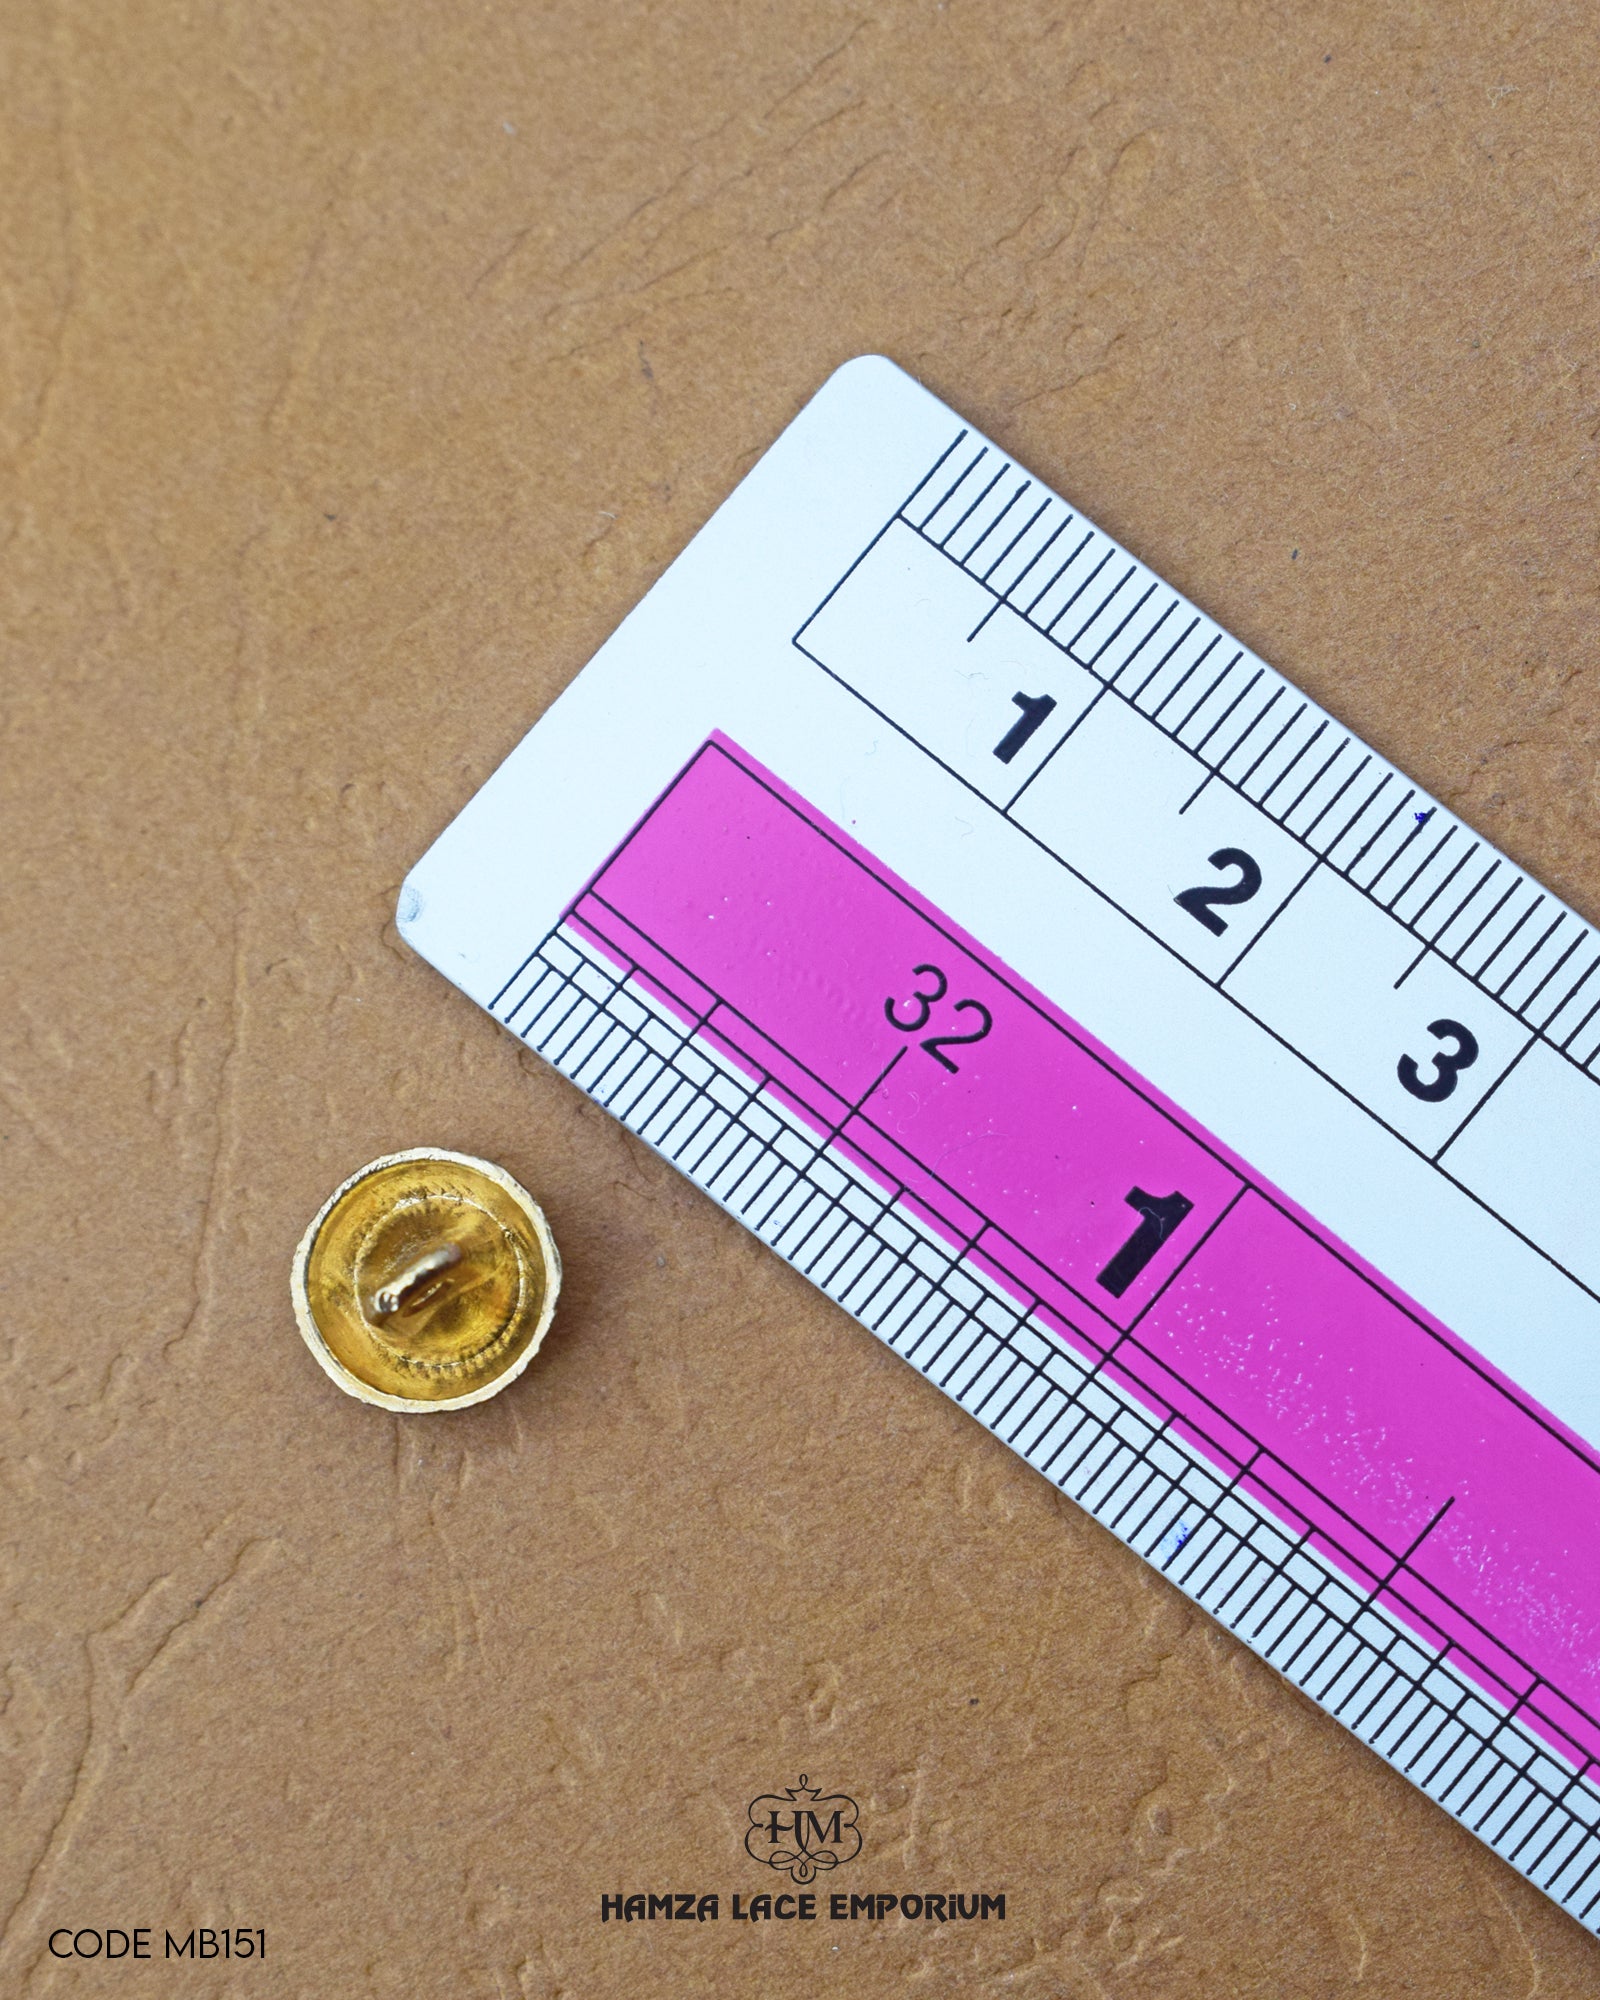 The size of the 'Metal Stone Button MB151' is measured using a ruler